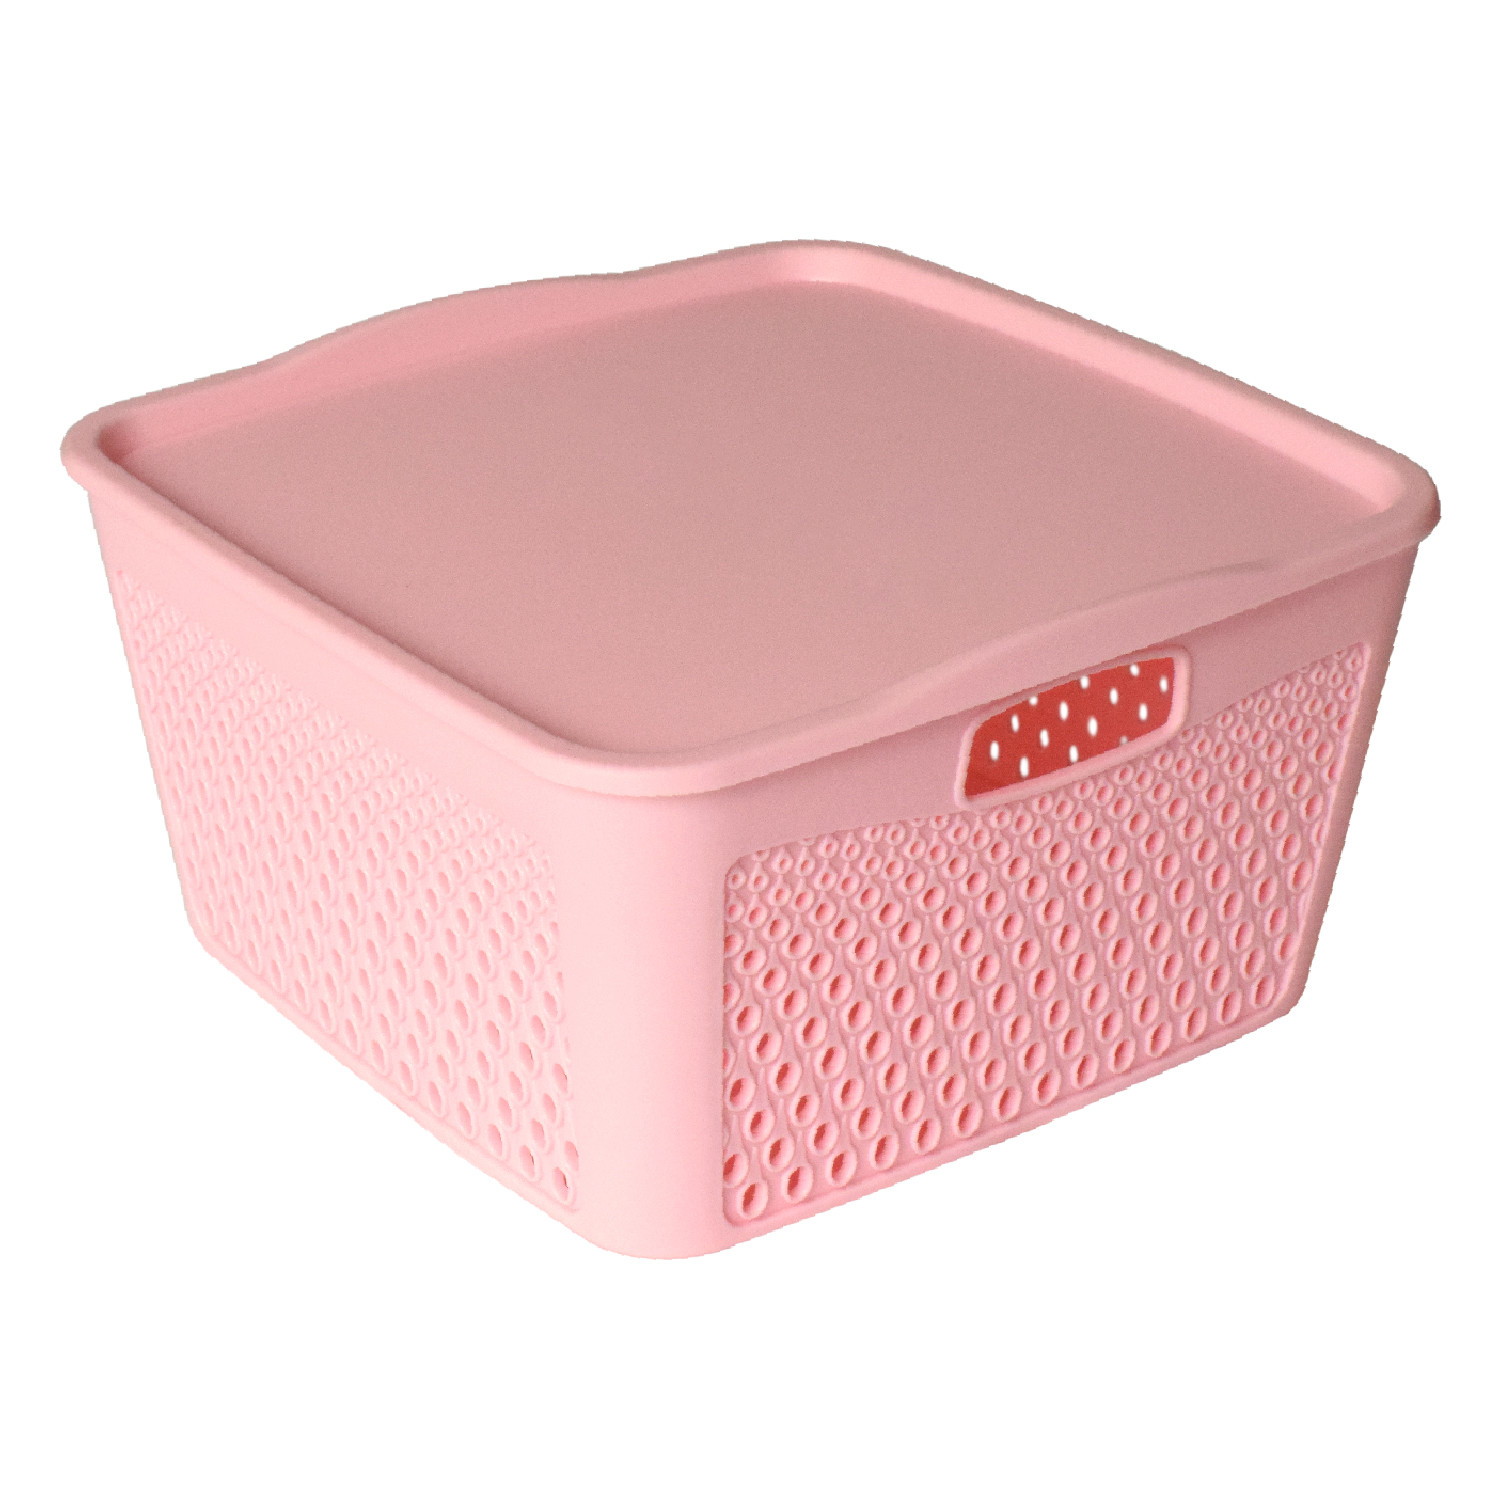 Kuber Industries Netted Design Unbreakable Multipurpose Square Shape Plastic Storage Baskets with lid Small (Pink)